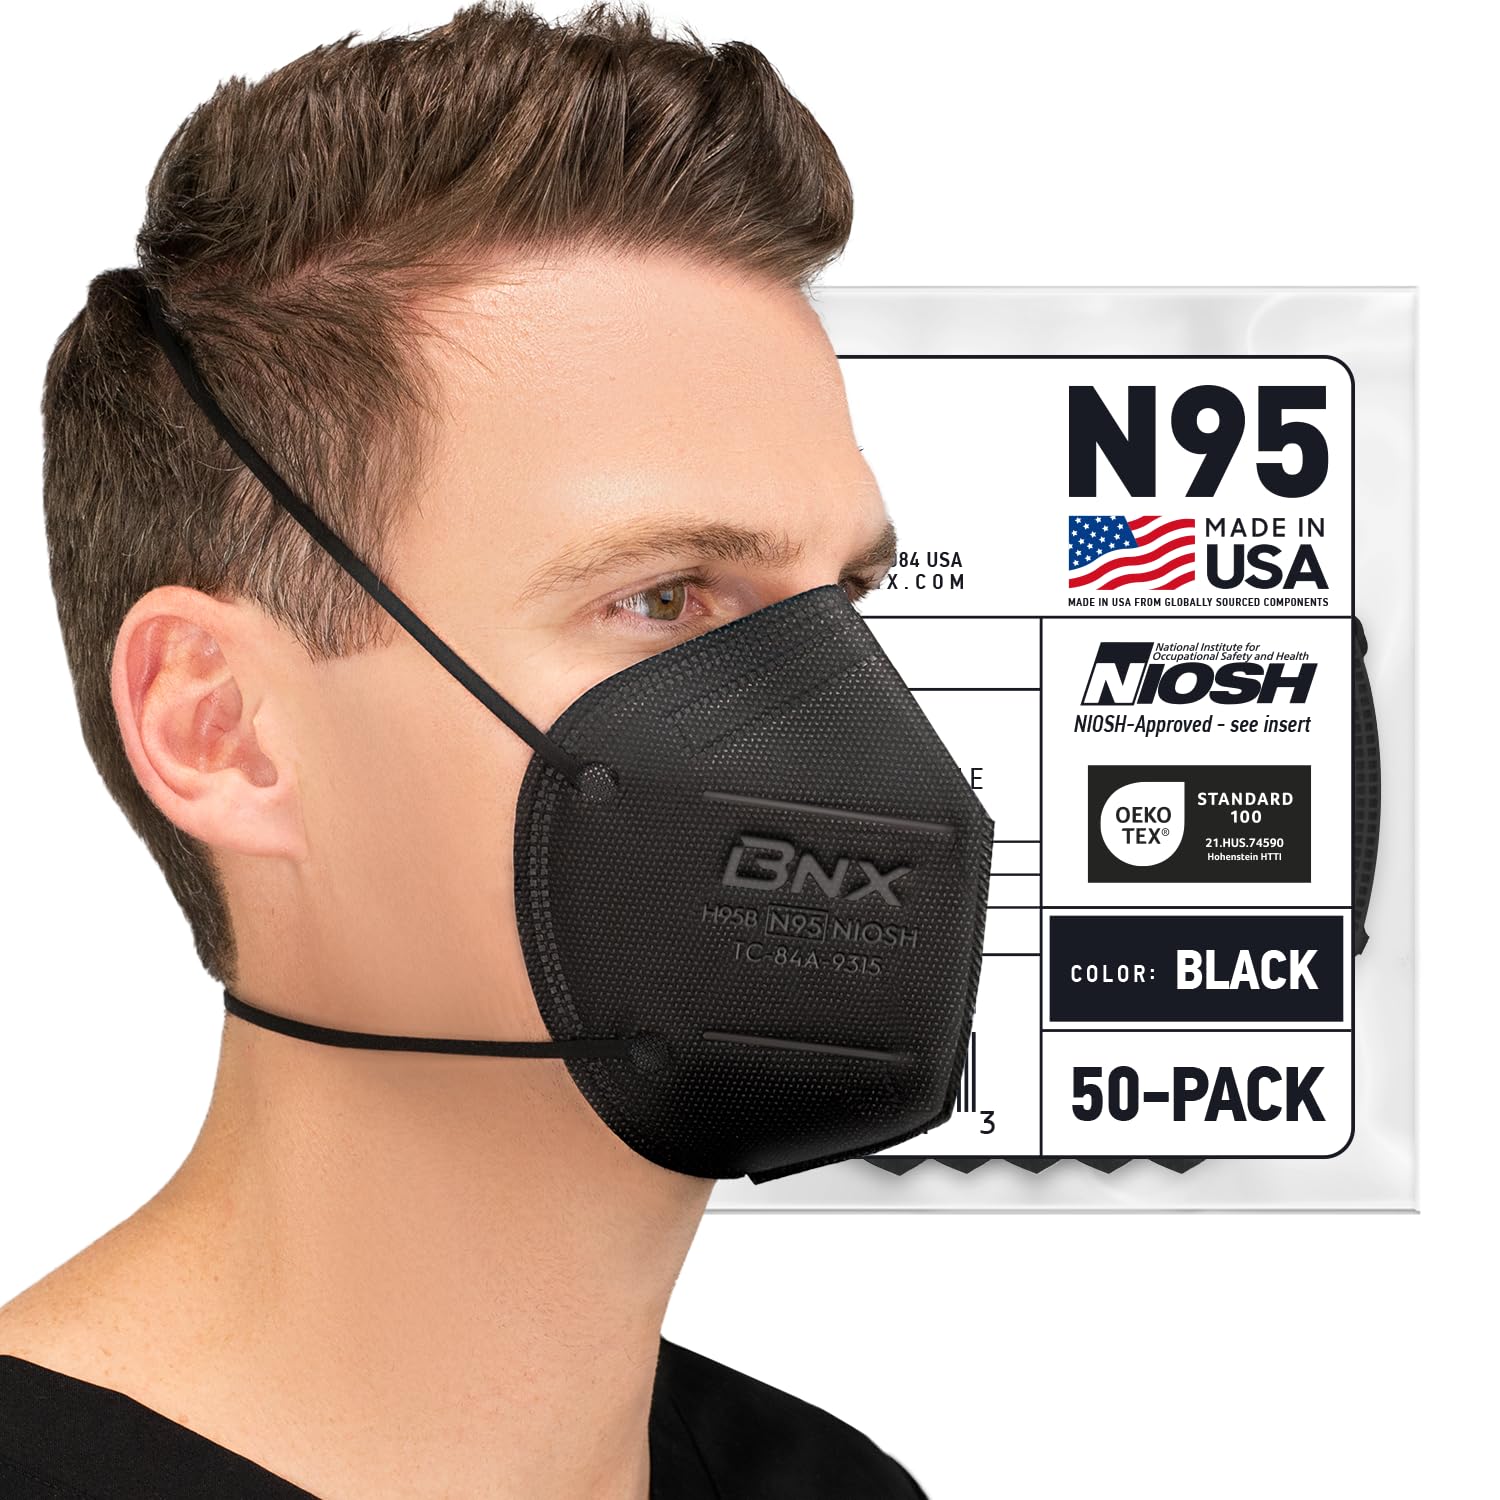 BNX N95 Mask NIOSH Certified MADE IN USA Particulate Respirator Protective Face Mask (10-Pack, Approval Number TC-84A-9315 / Model H95W) White